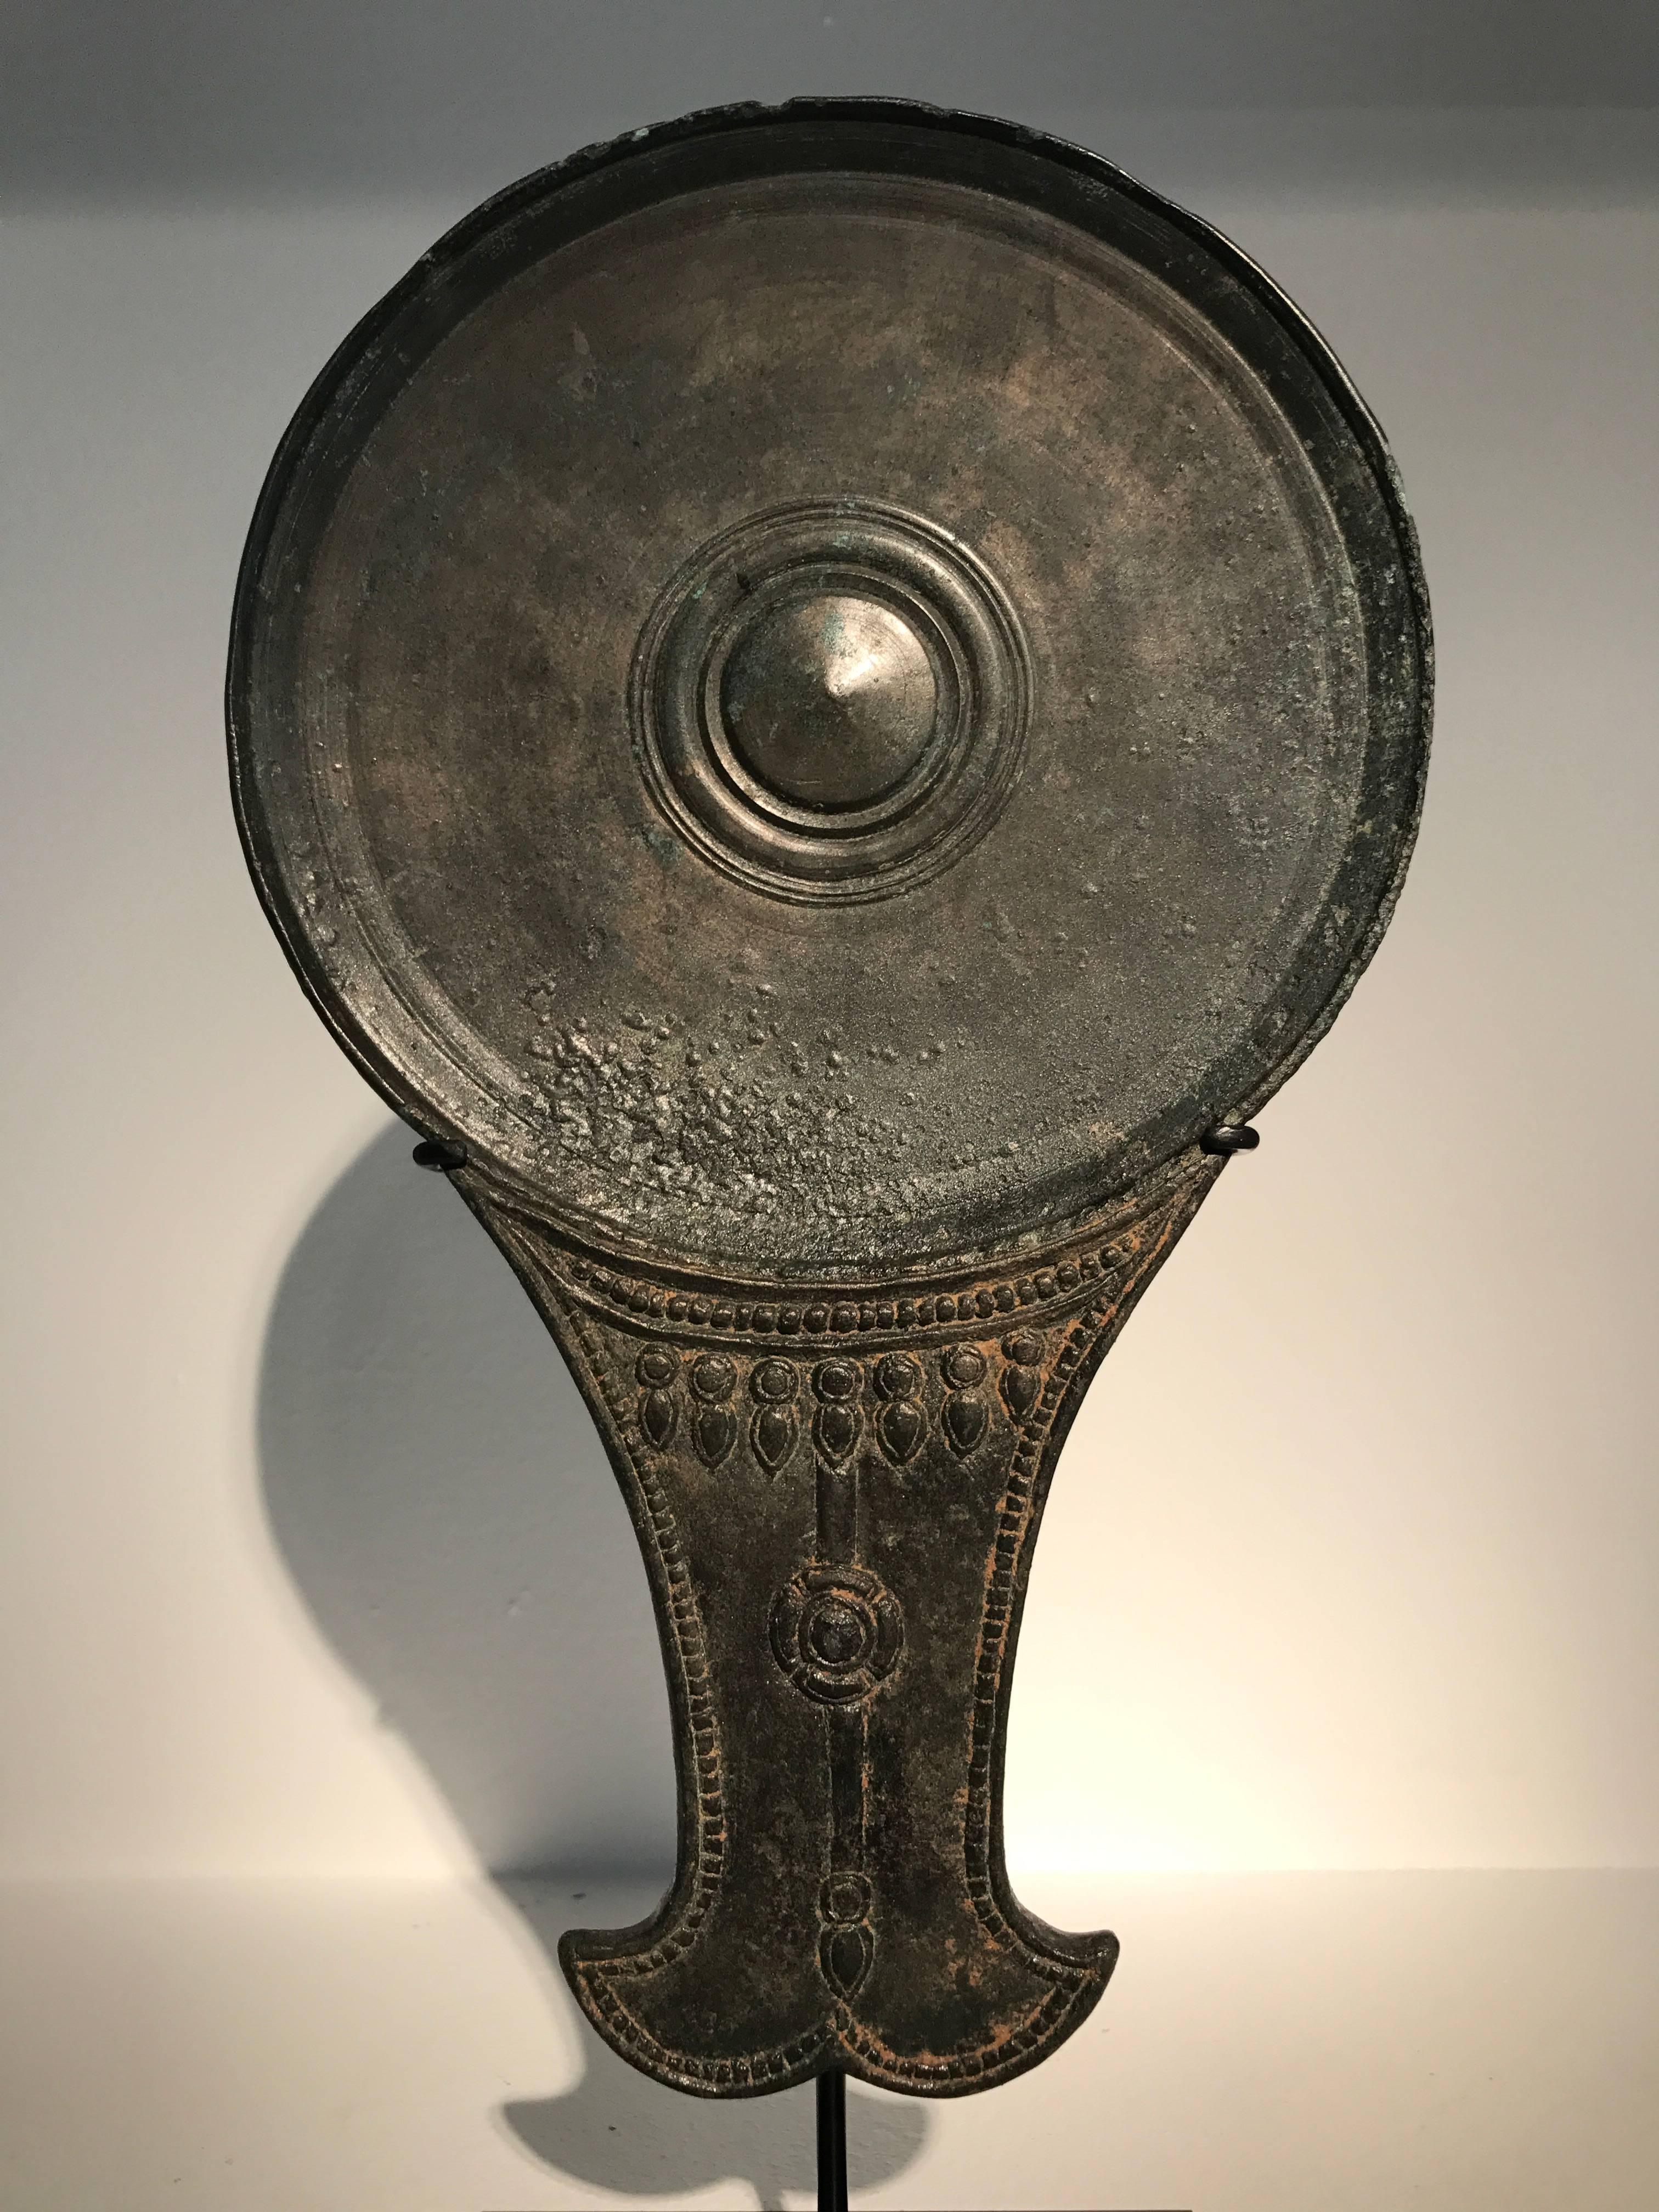 Exceptional Bronze Mirror with handle, Khmer style,Cambodja
Southeast Asia,11-13 th Century